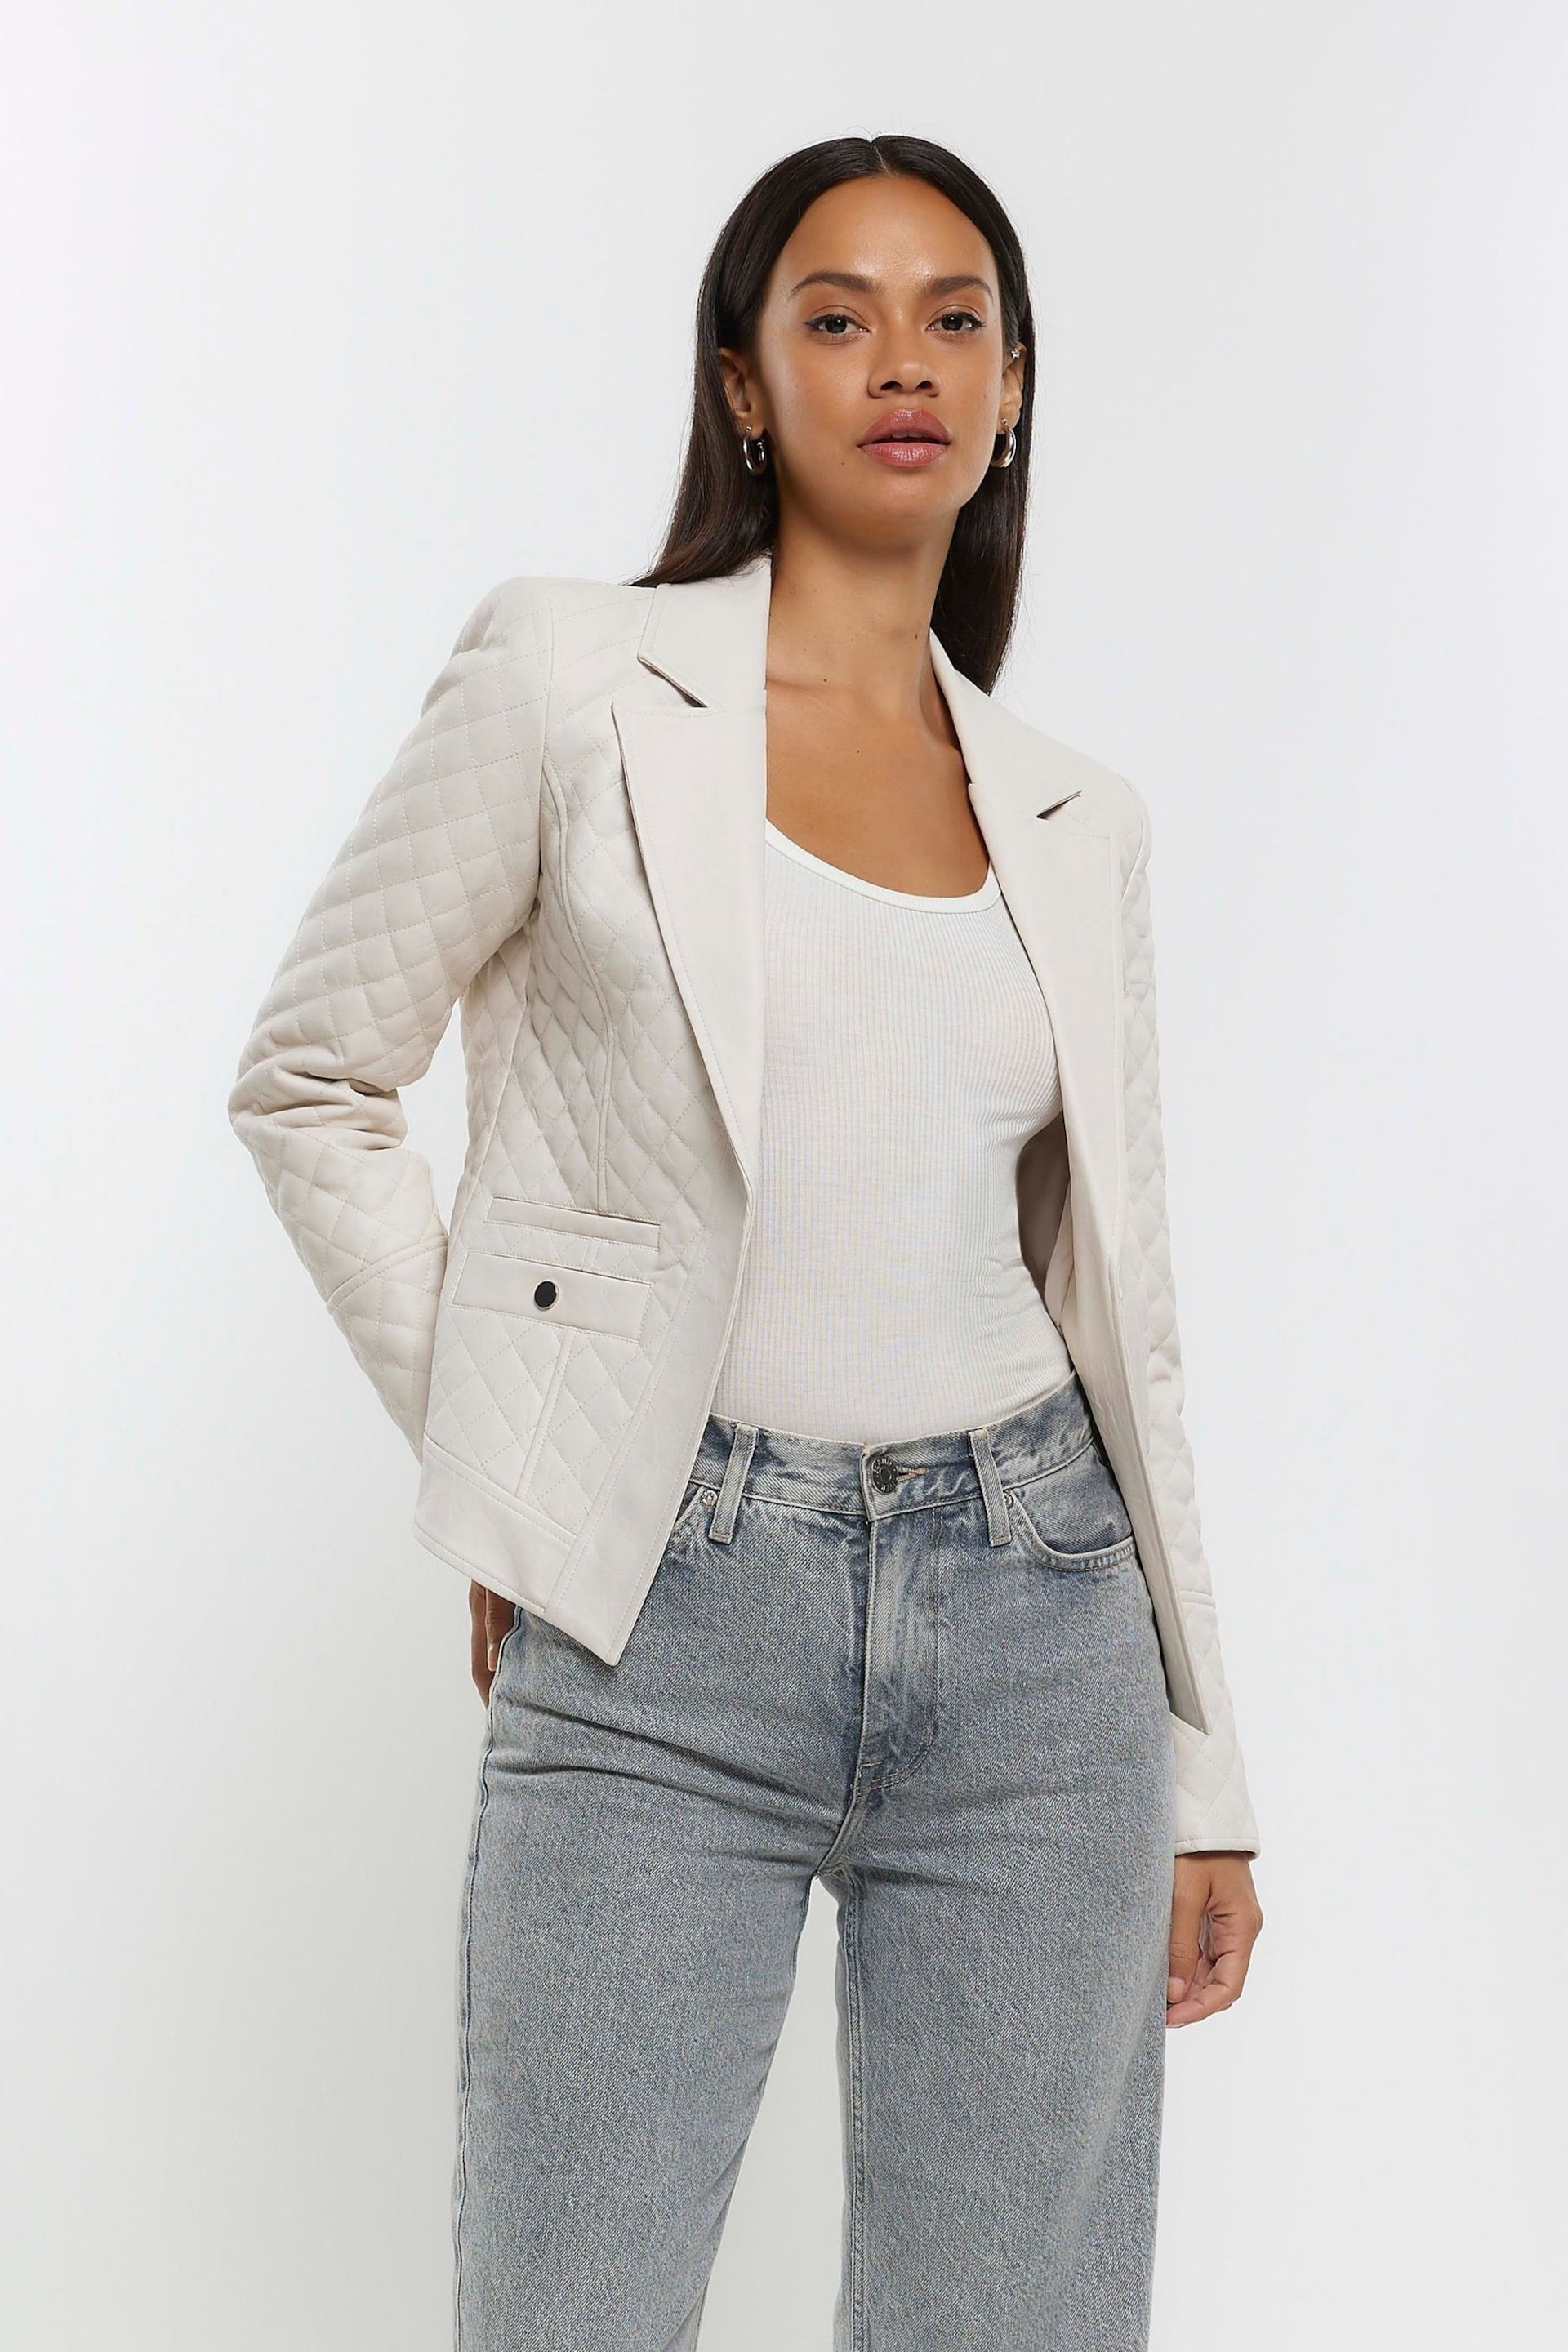 River Island Natural Faux Leather Quilted Blazer - Image 1 of 4